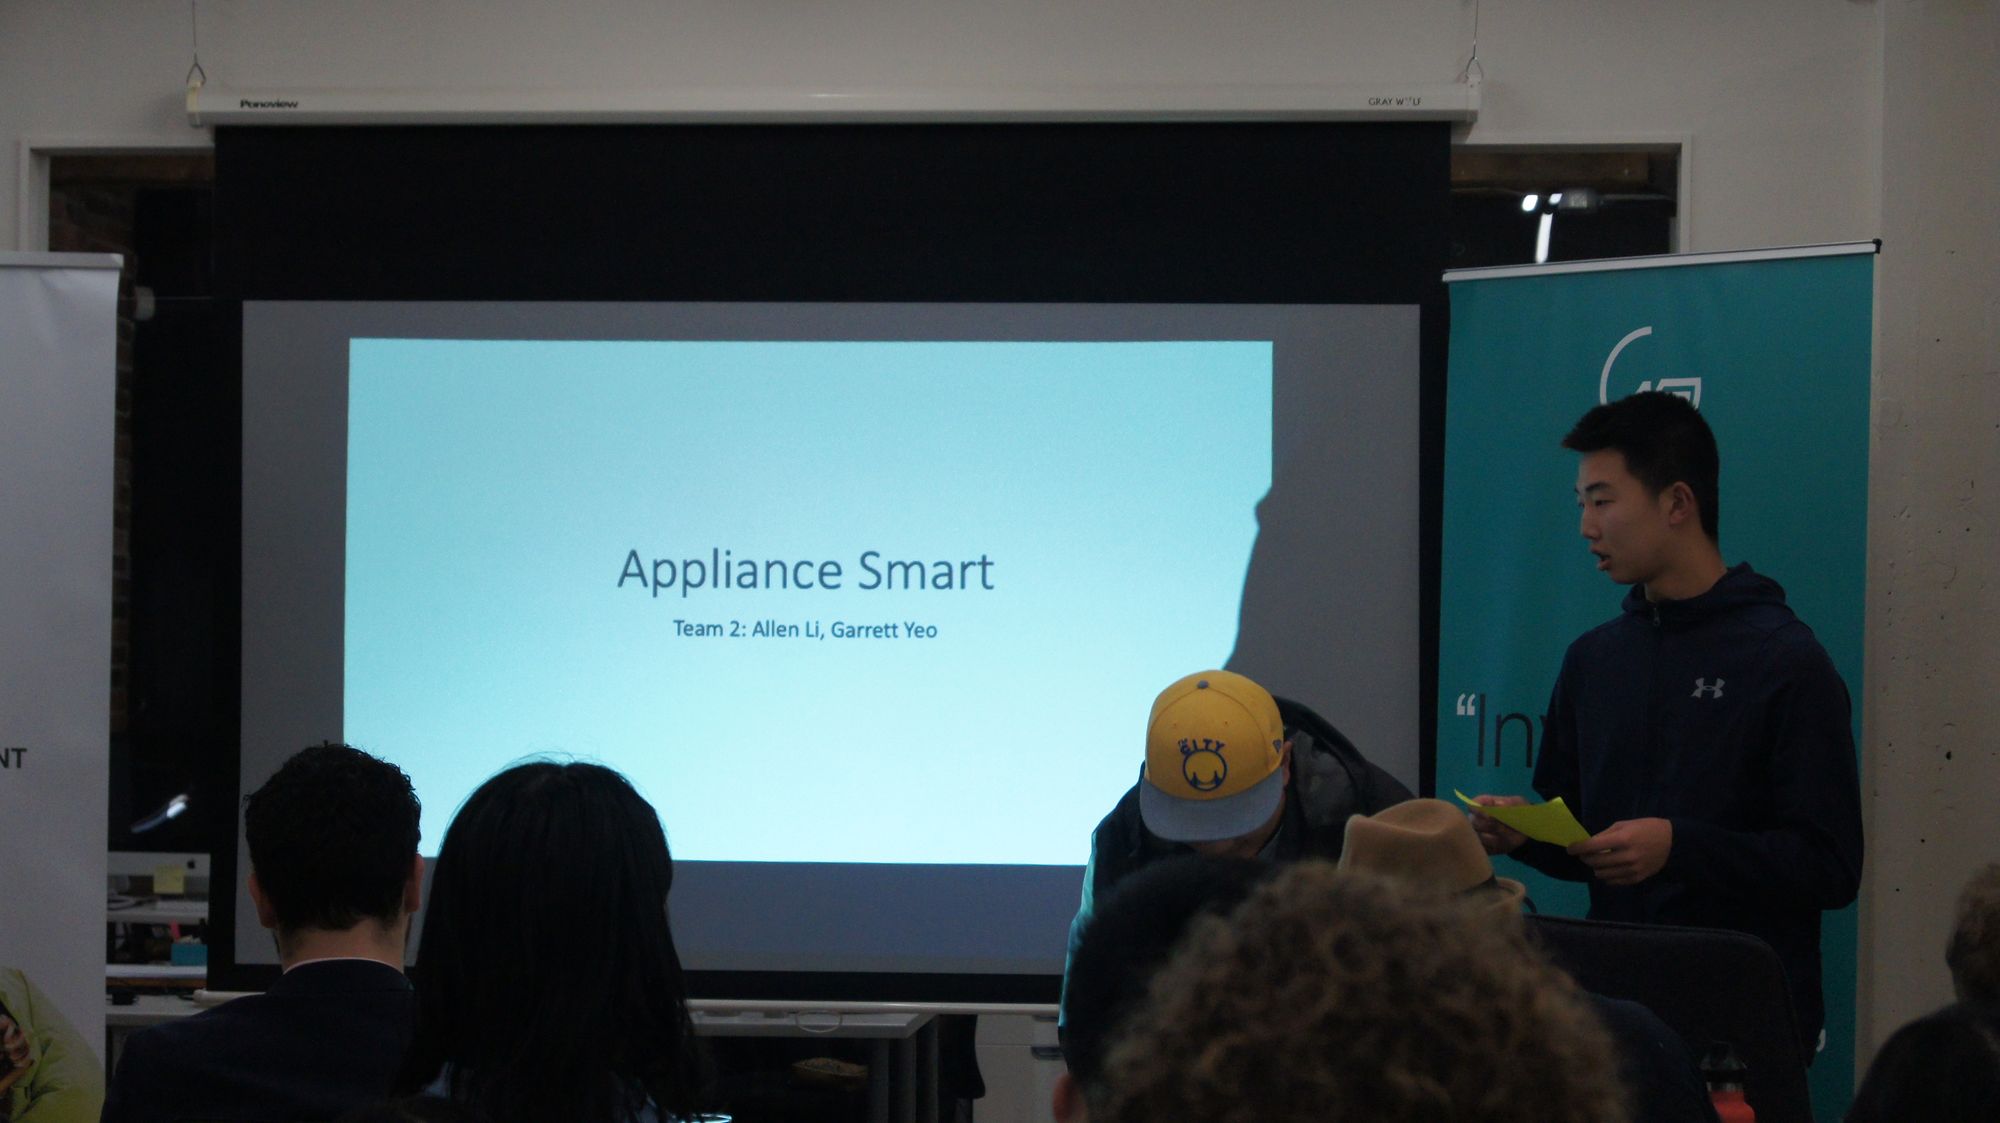 It's Team 2's turn to introduce Appliance Smart.